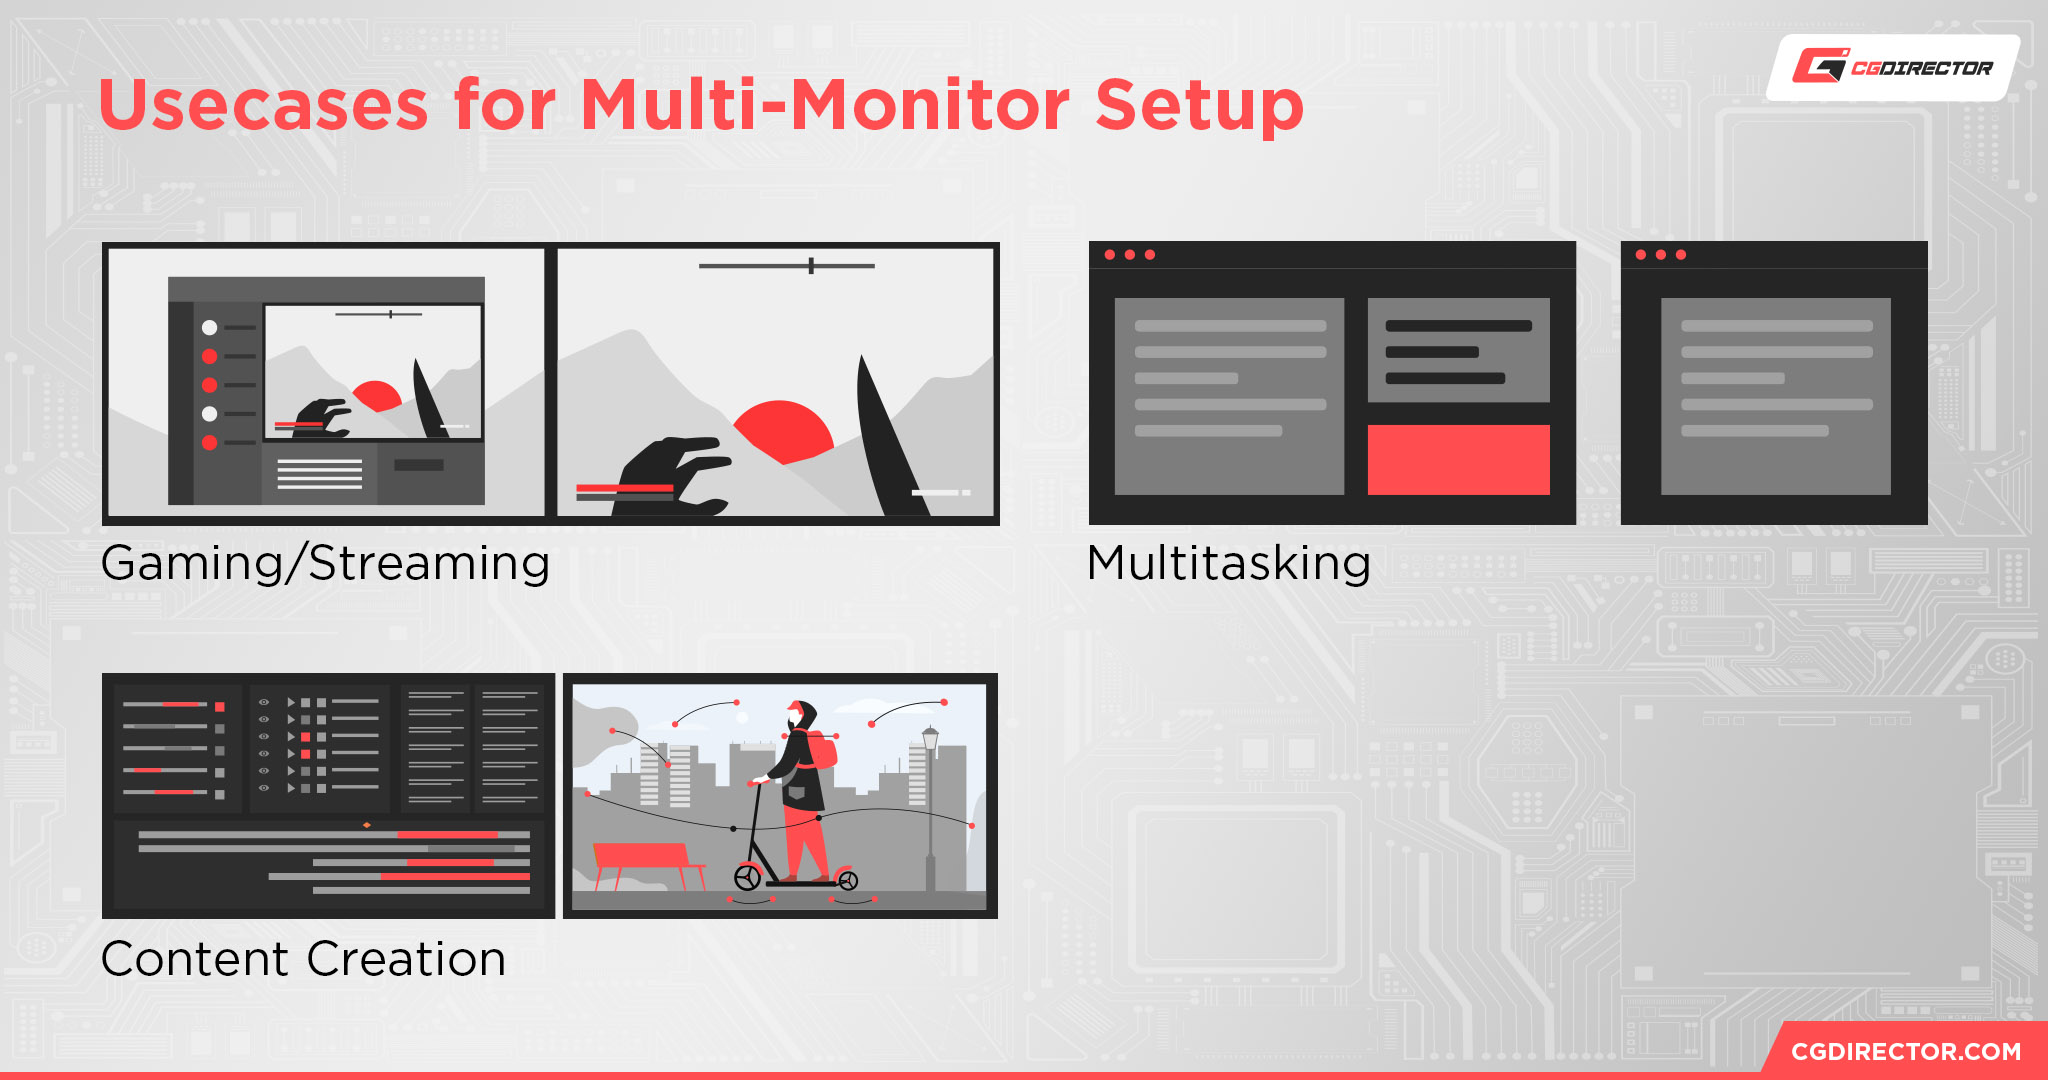 Use cases for Multi-Monitor Setup